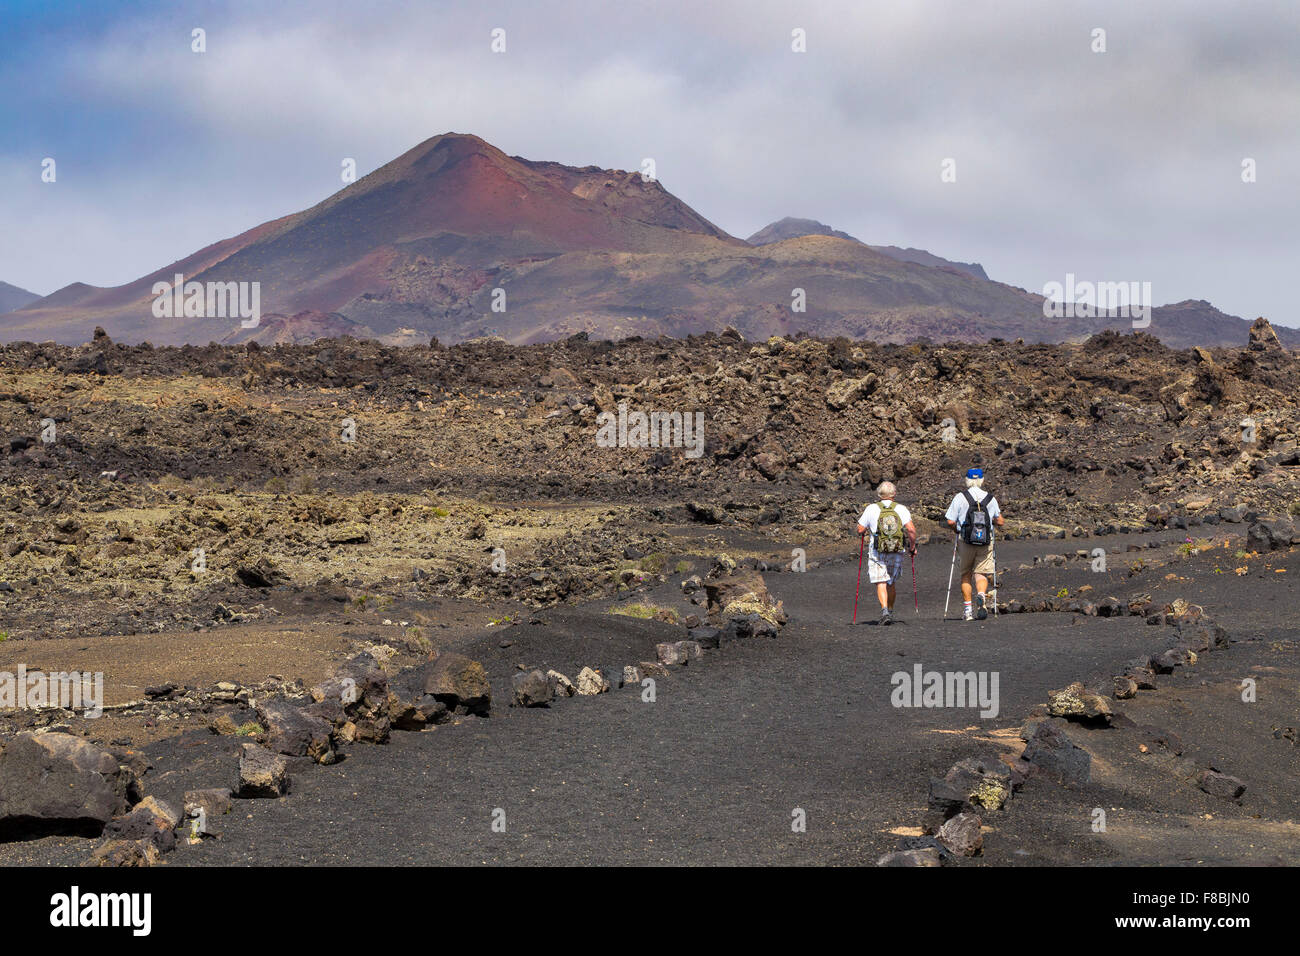 Hiking trail through volcanic landscape, Montana del Cuervo, Lanzarote, Canary Islands, Spain Stock Photo